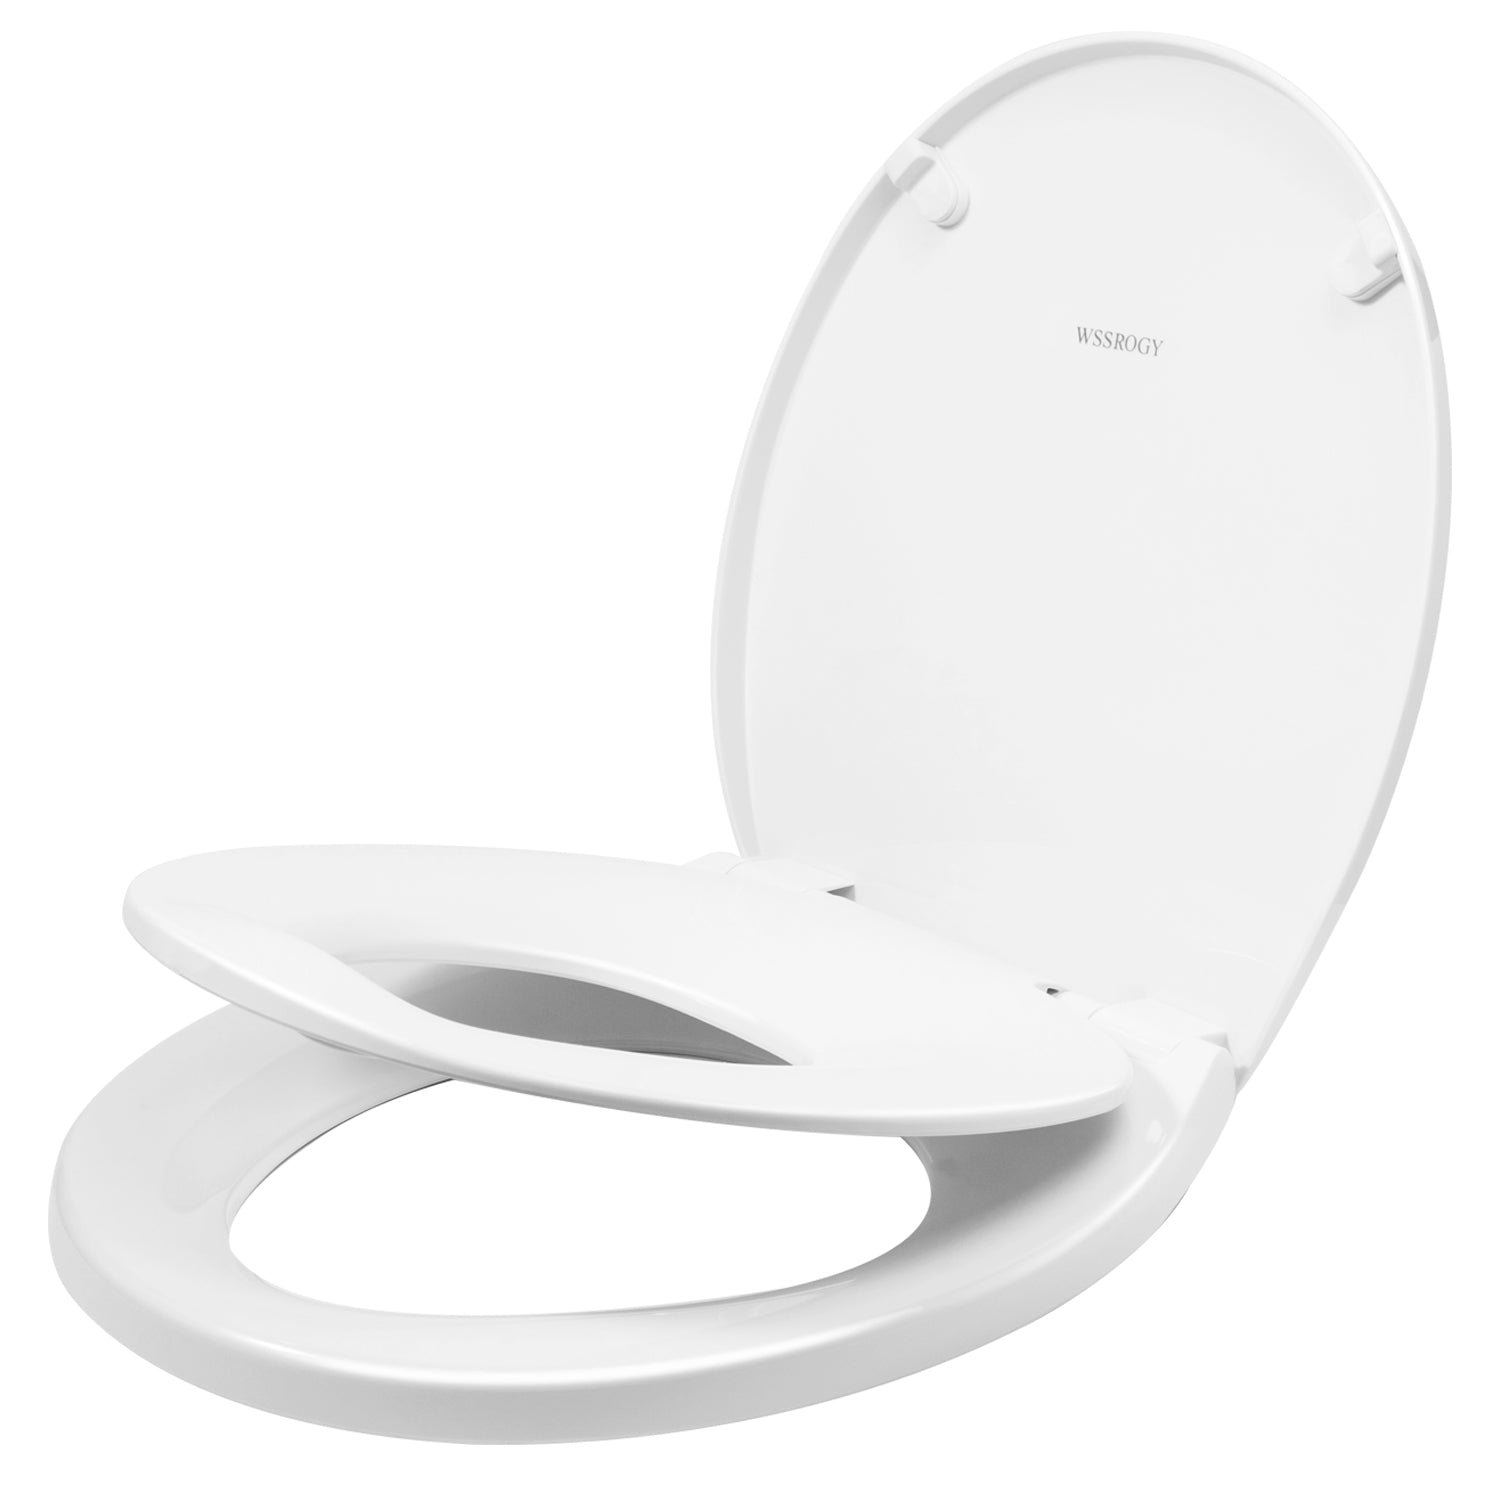 Elongated Toilet Seat with Slow Close Seat, Easy Clean, Suitable Standard Elongated or Oval Toilet with Thickened Plastic Lid, Plastic, White